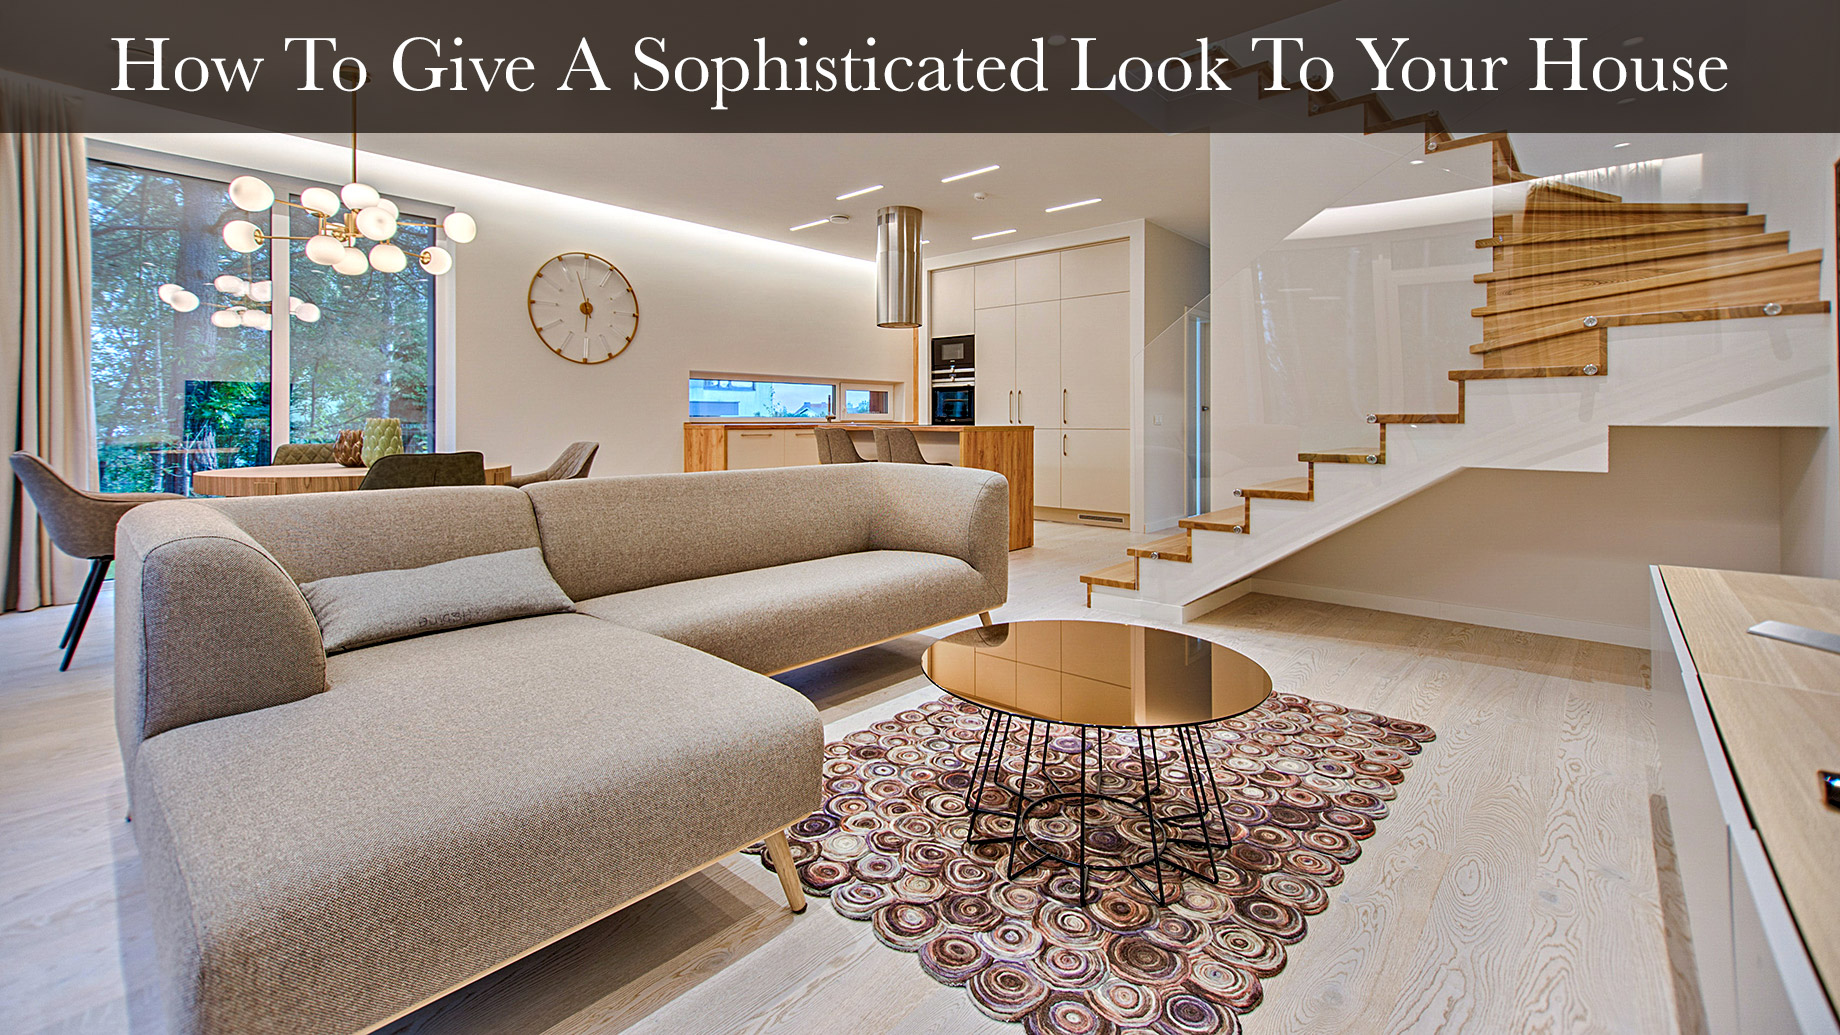 How To Give A Sophisticated Look To Your House